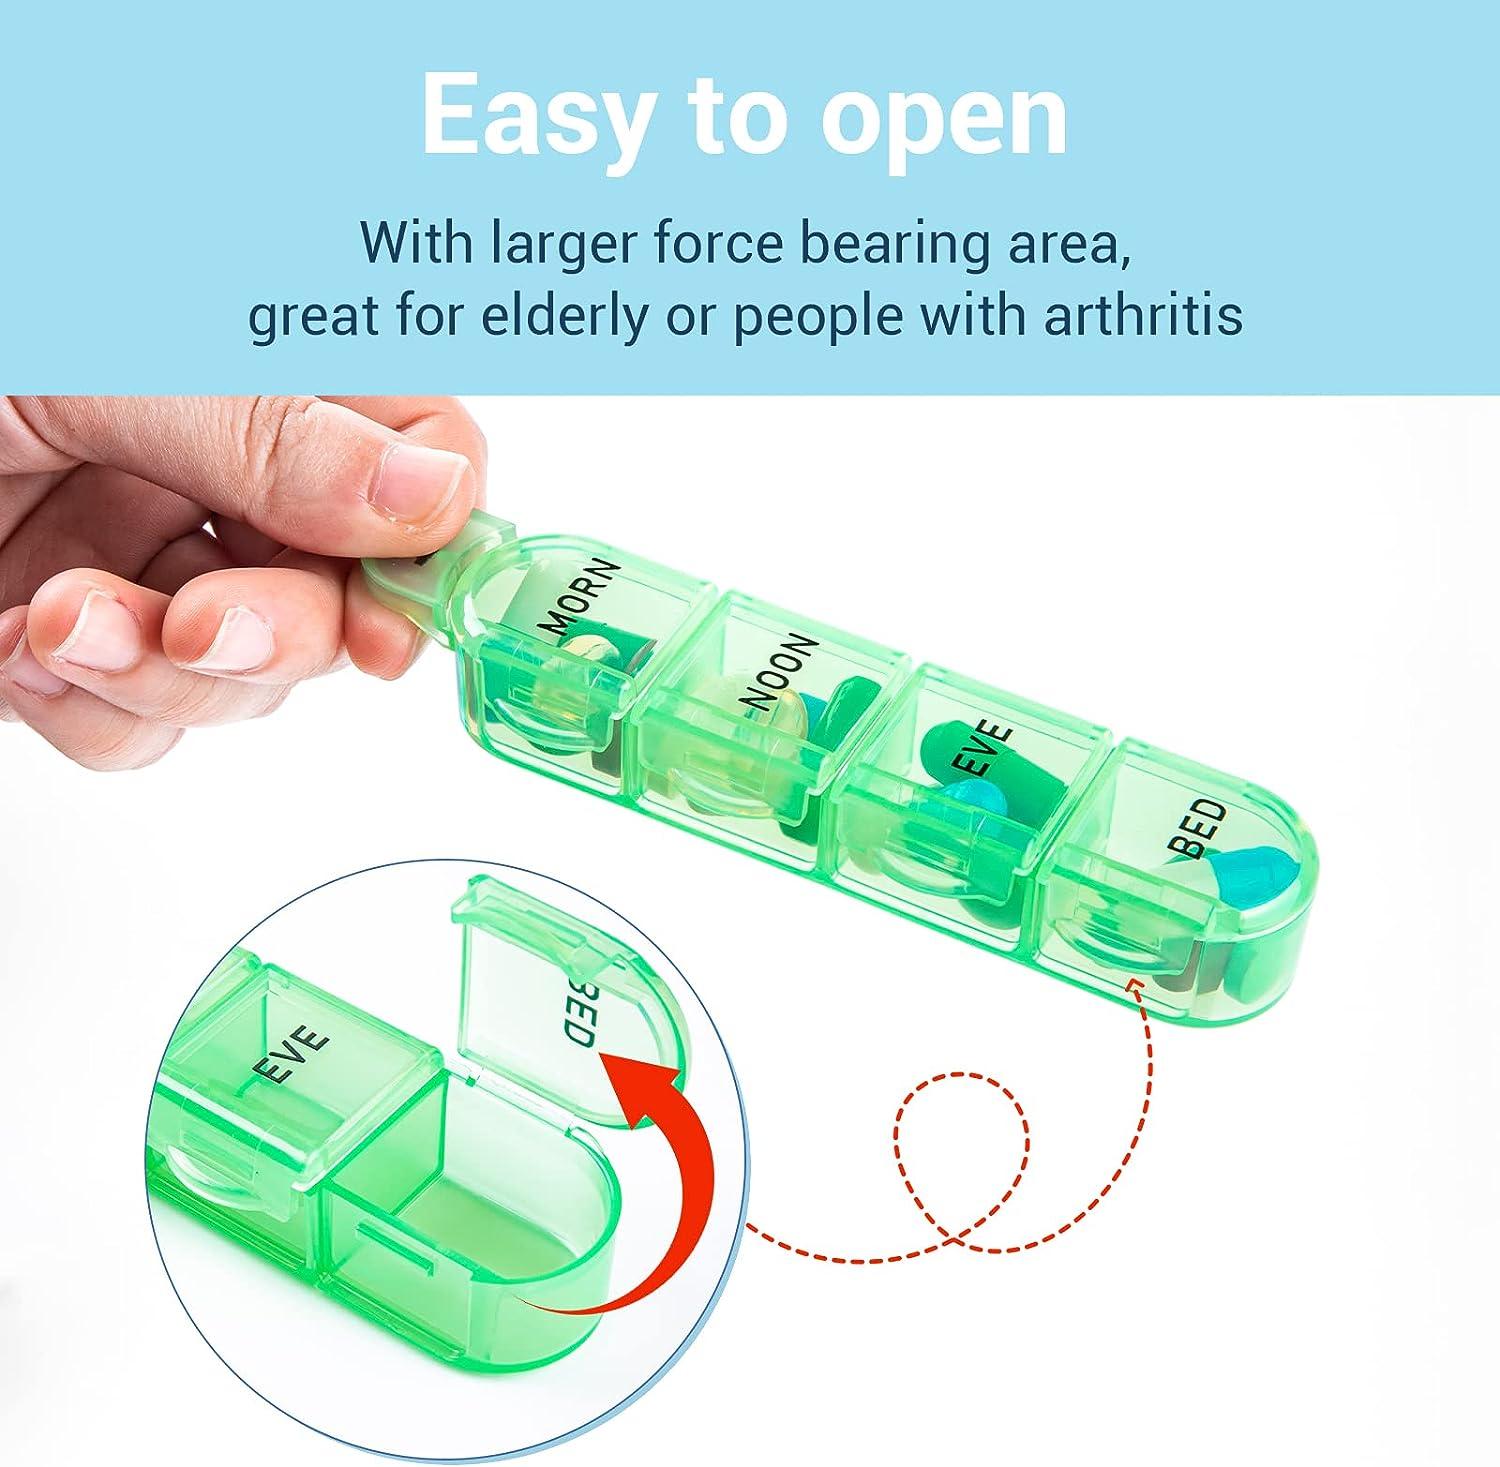  Zoksi Vitamin Bottle Organizer, Supplement Organizer with 7  Large Compartments, Medicine Pill Dispenser with Two Lids, Pill Storage  Container for Monthly Medication : Health & Household